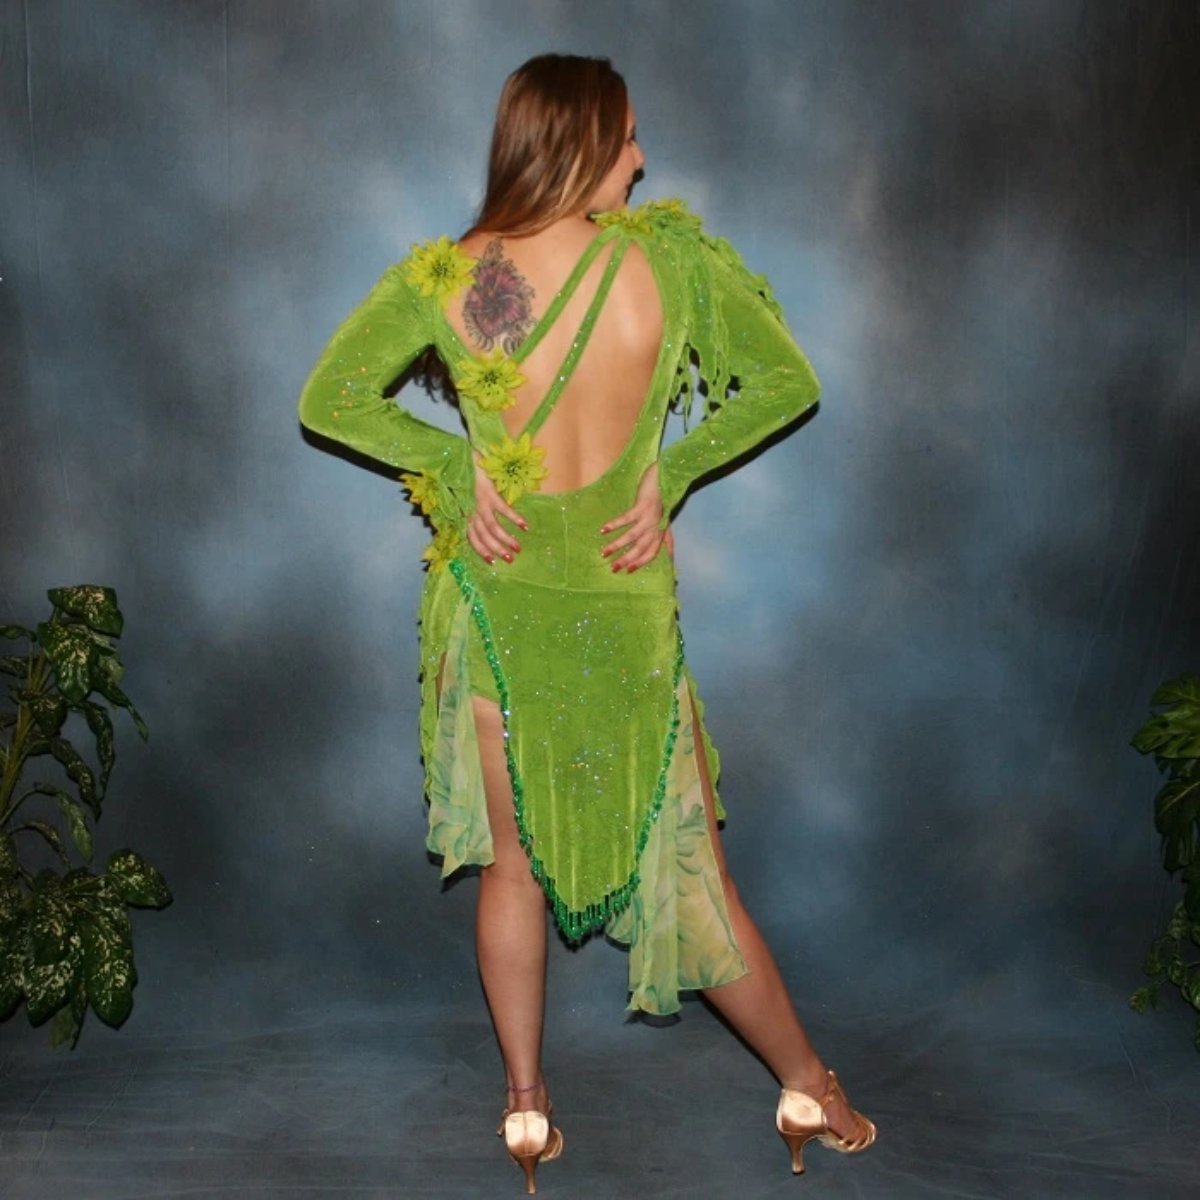 back view of Green Latin/rhythm dress created in apple green glitter slinky fabric, with print chiffon accents, embellishing done of silk flowers with Swarovski rhinestone work, also features back strap detailing along with extensive hand beading on skirt edges & choker.